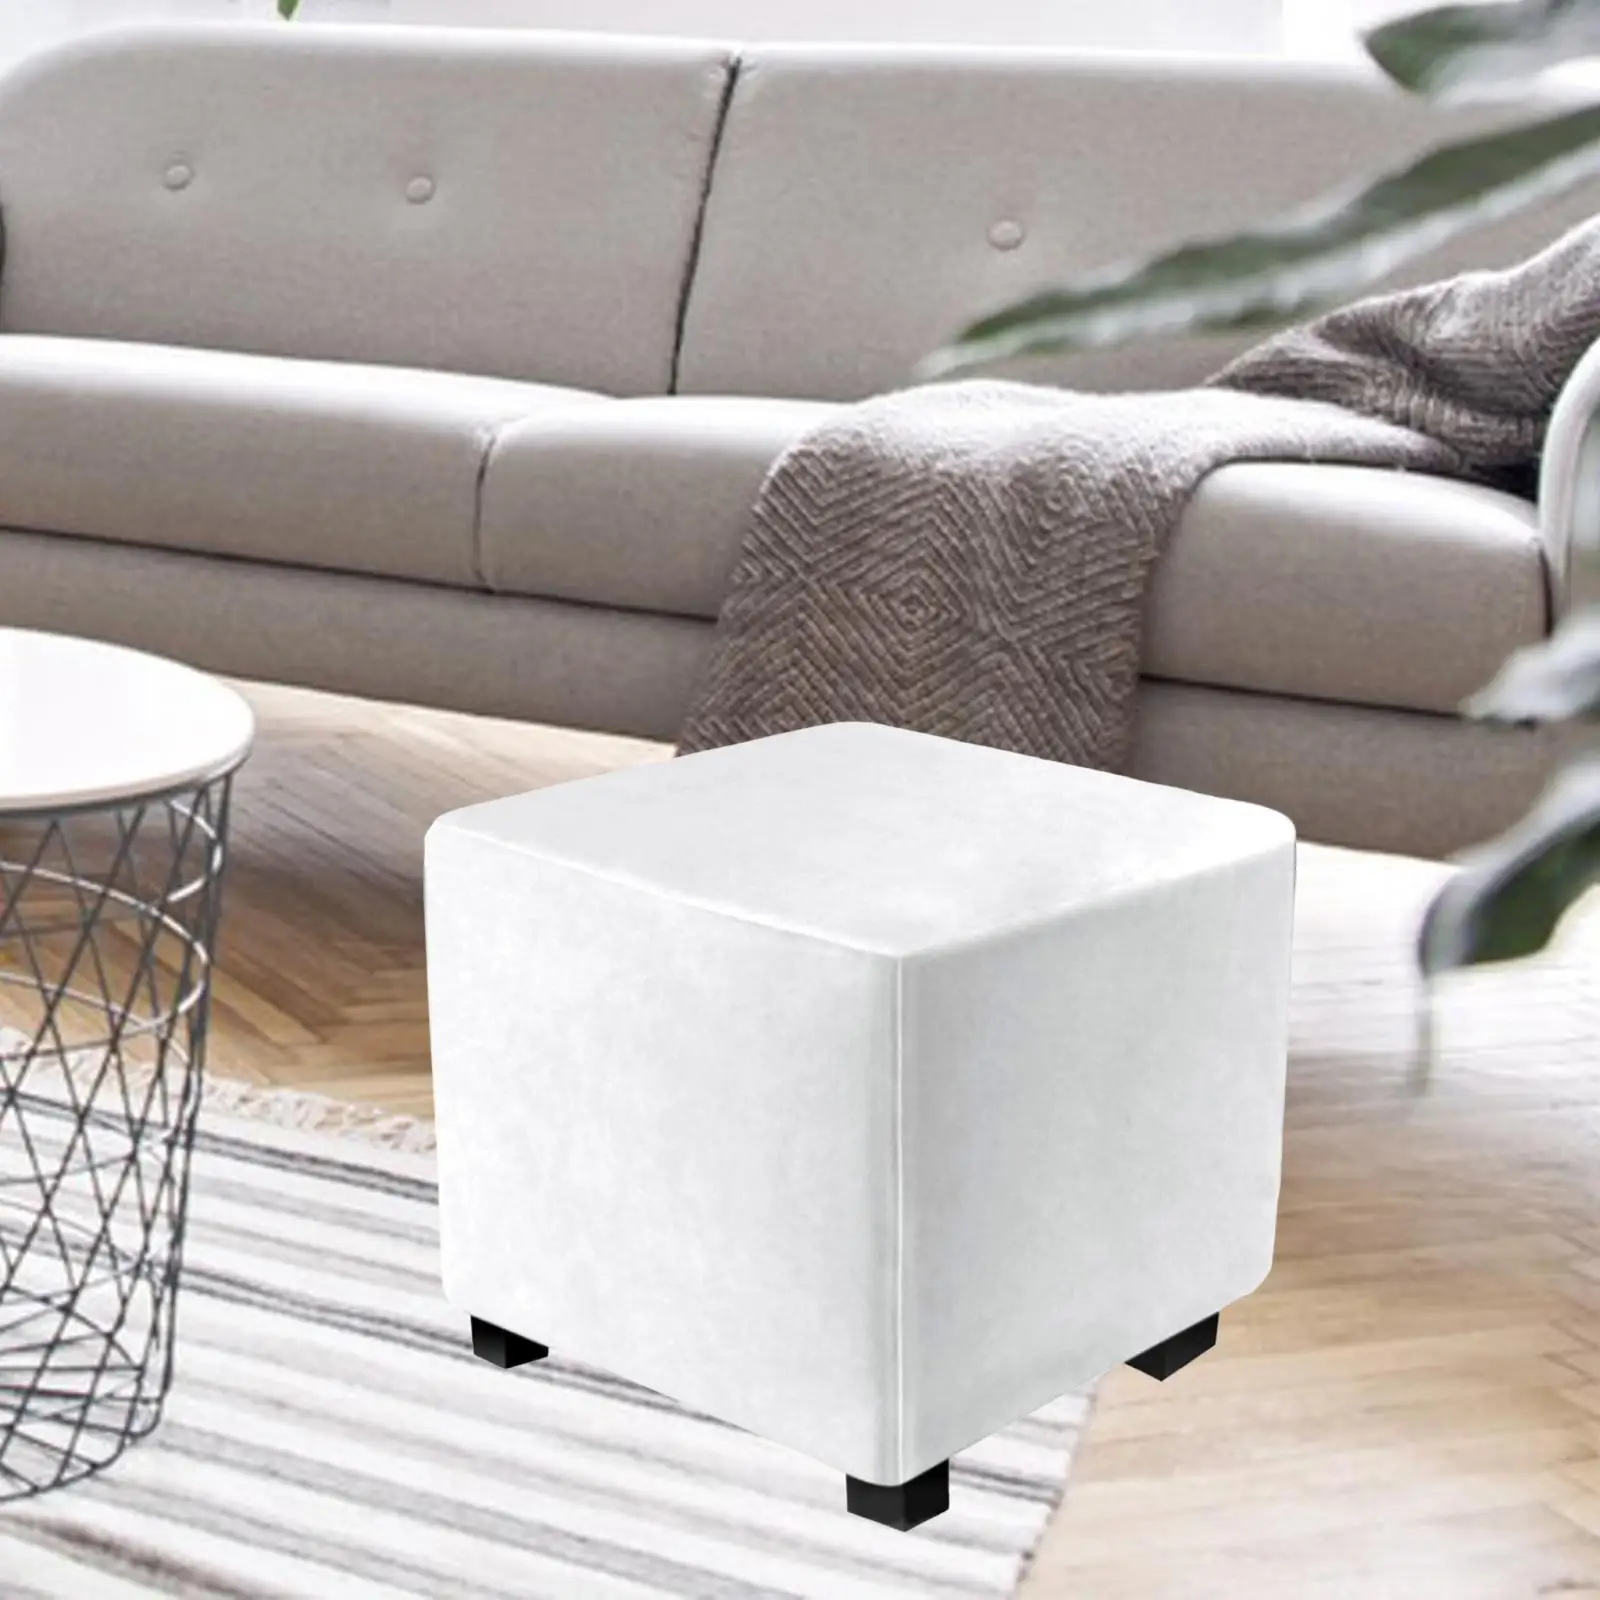 Removable Square Chair Cover Elastic Bottom Stool Furniture Protector Dustproof Footrest Foot Stool Slipcover Ottoman Cover